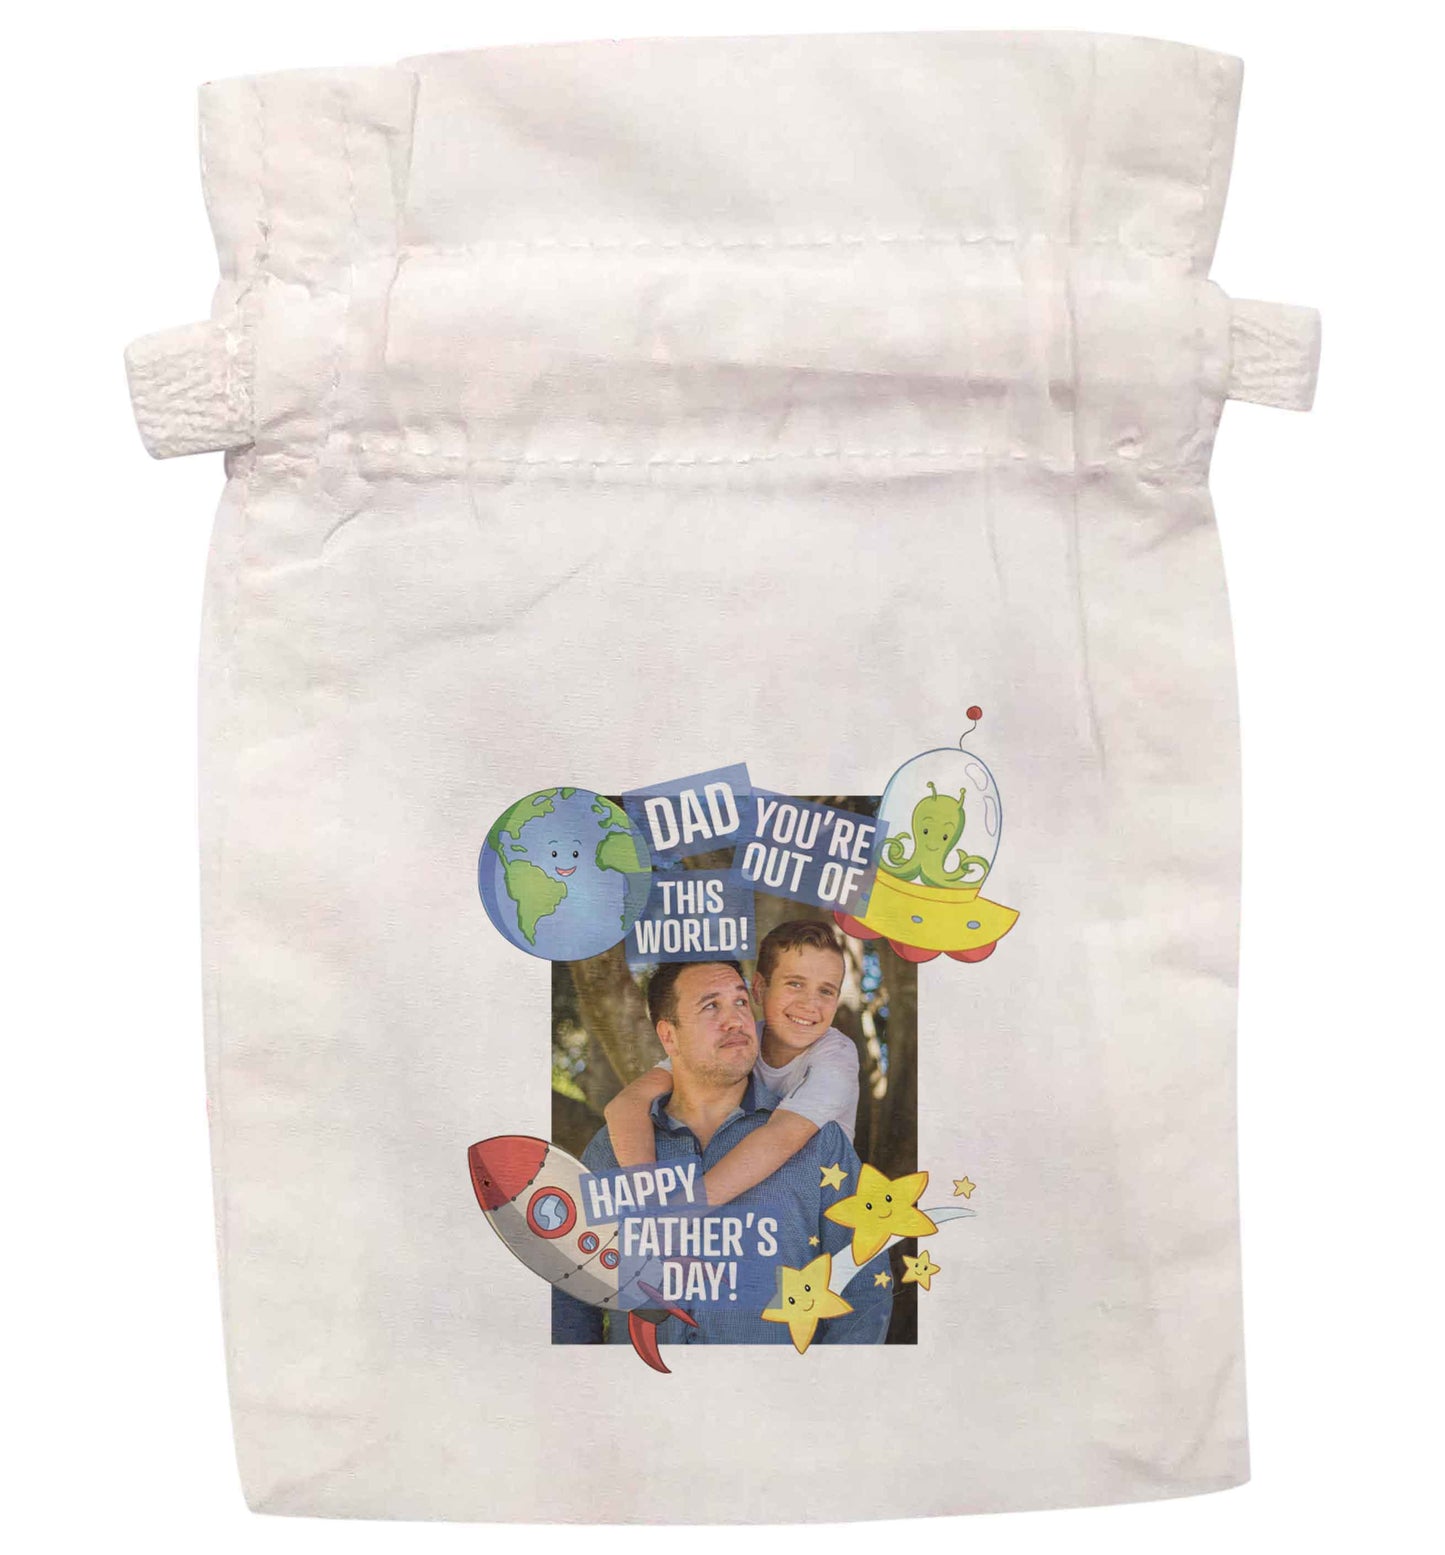 Dad you're out of this world happy Father's day!  | XS - L | Pouch / Drawstring bag / Sack | Organic Cotton | Bulk discounts available!